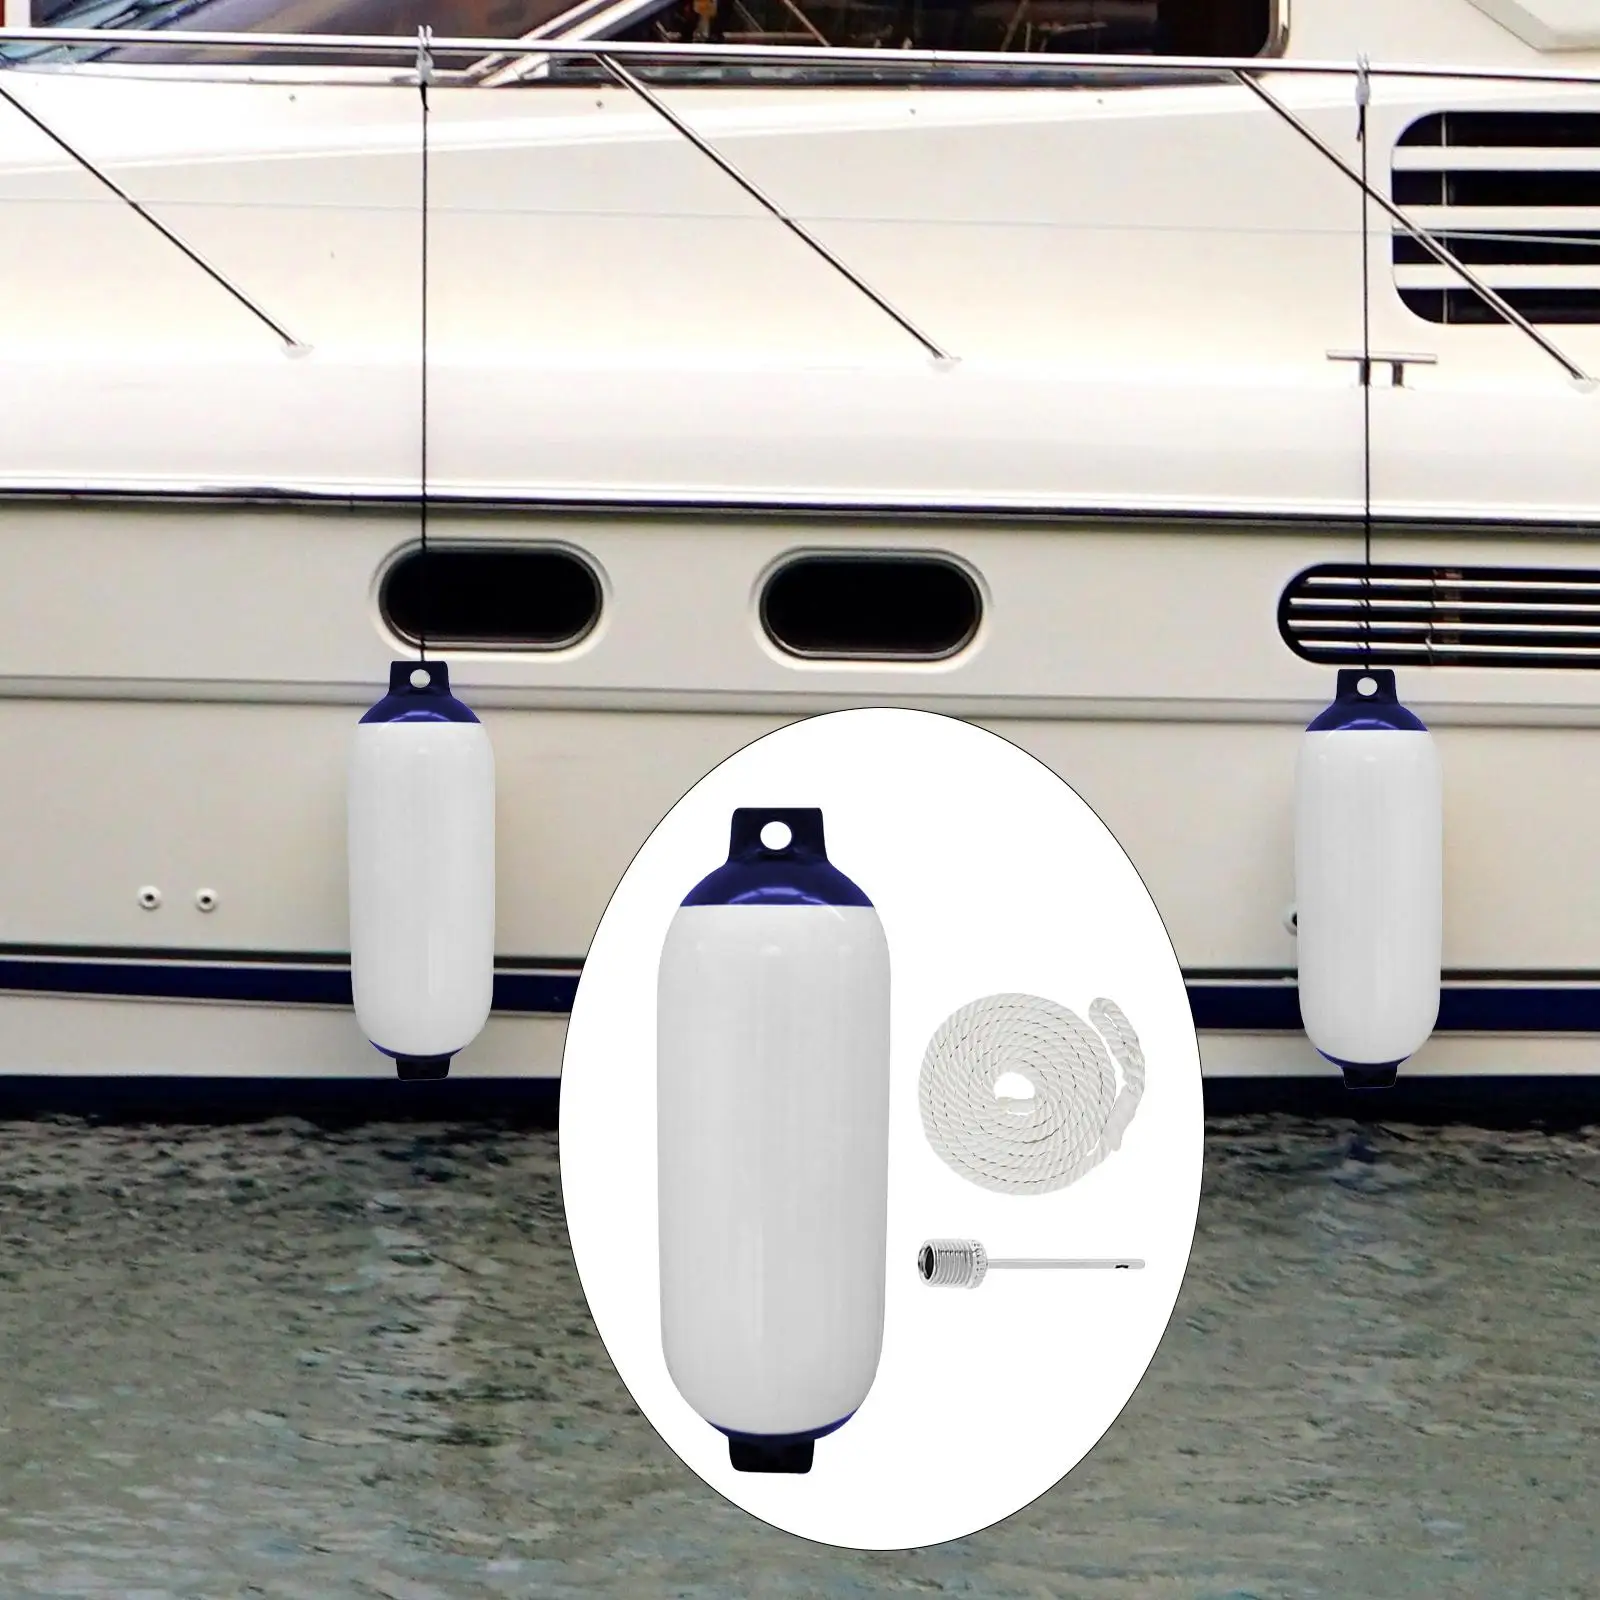 Marine Boat Fender for Bumper Protection with Ropes Anti Collision Protection